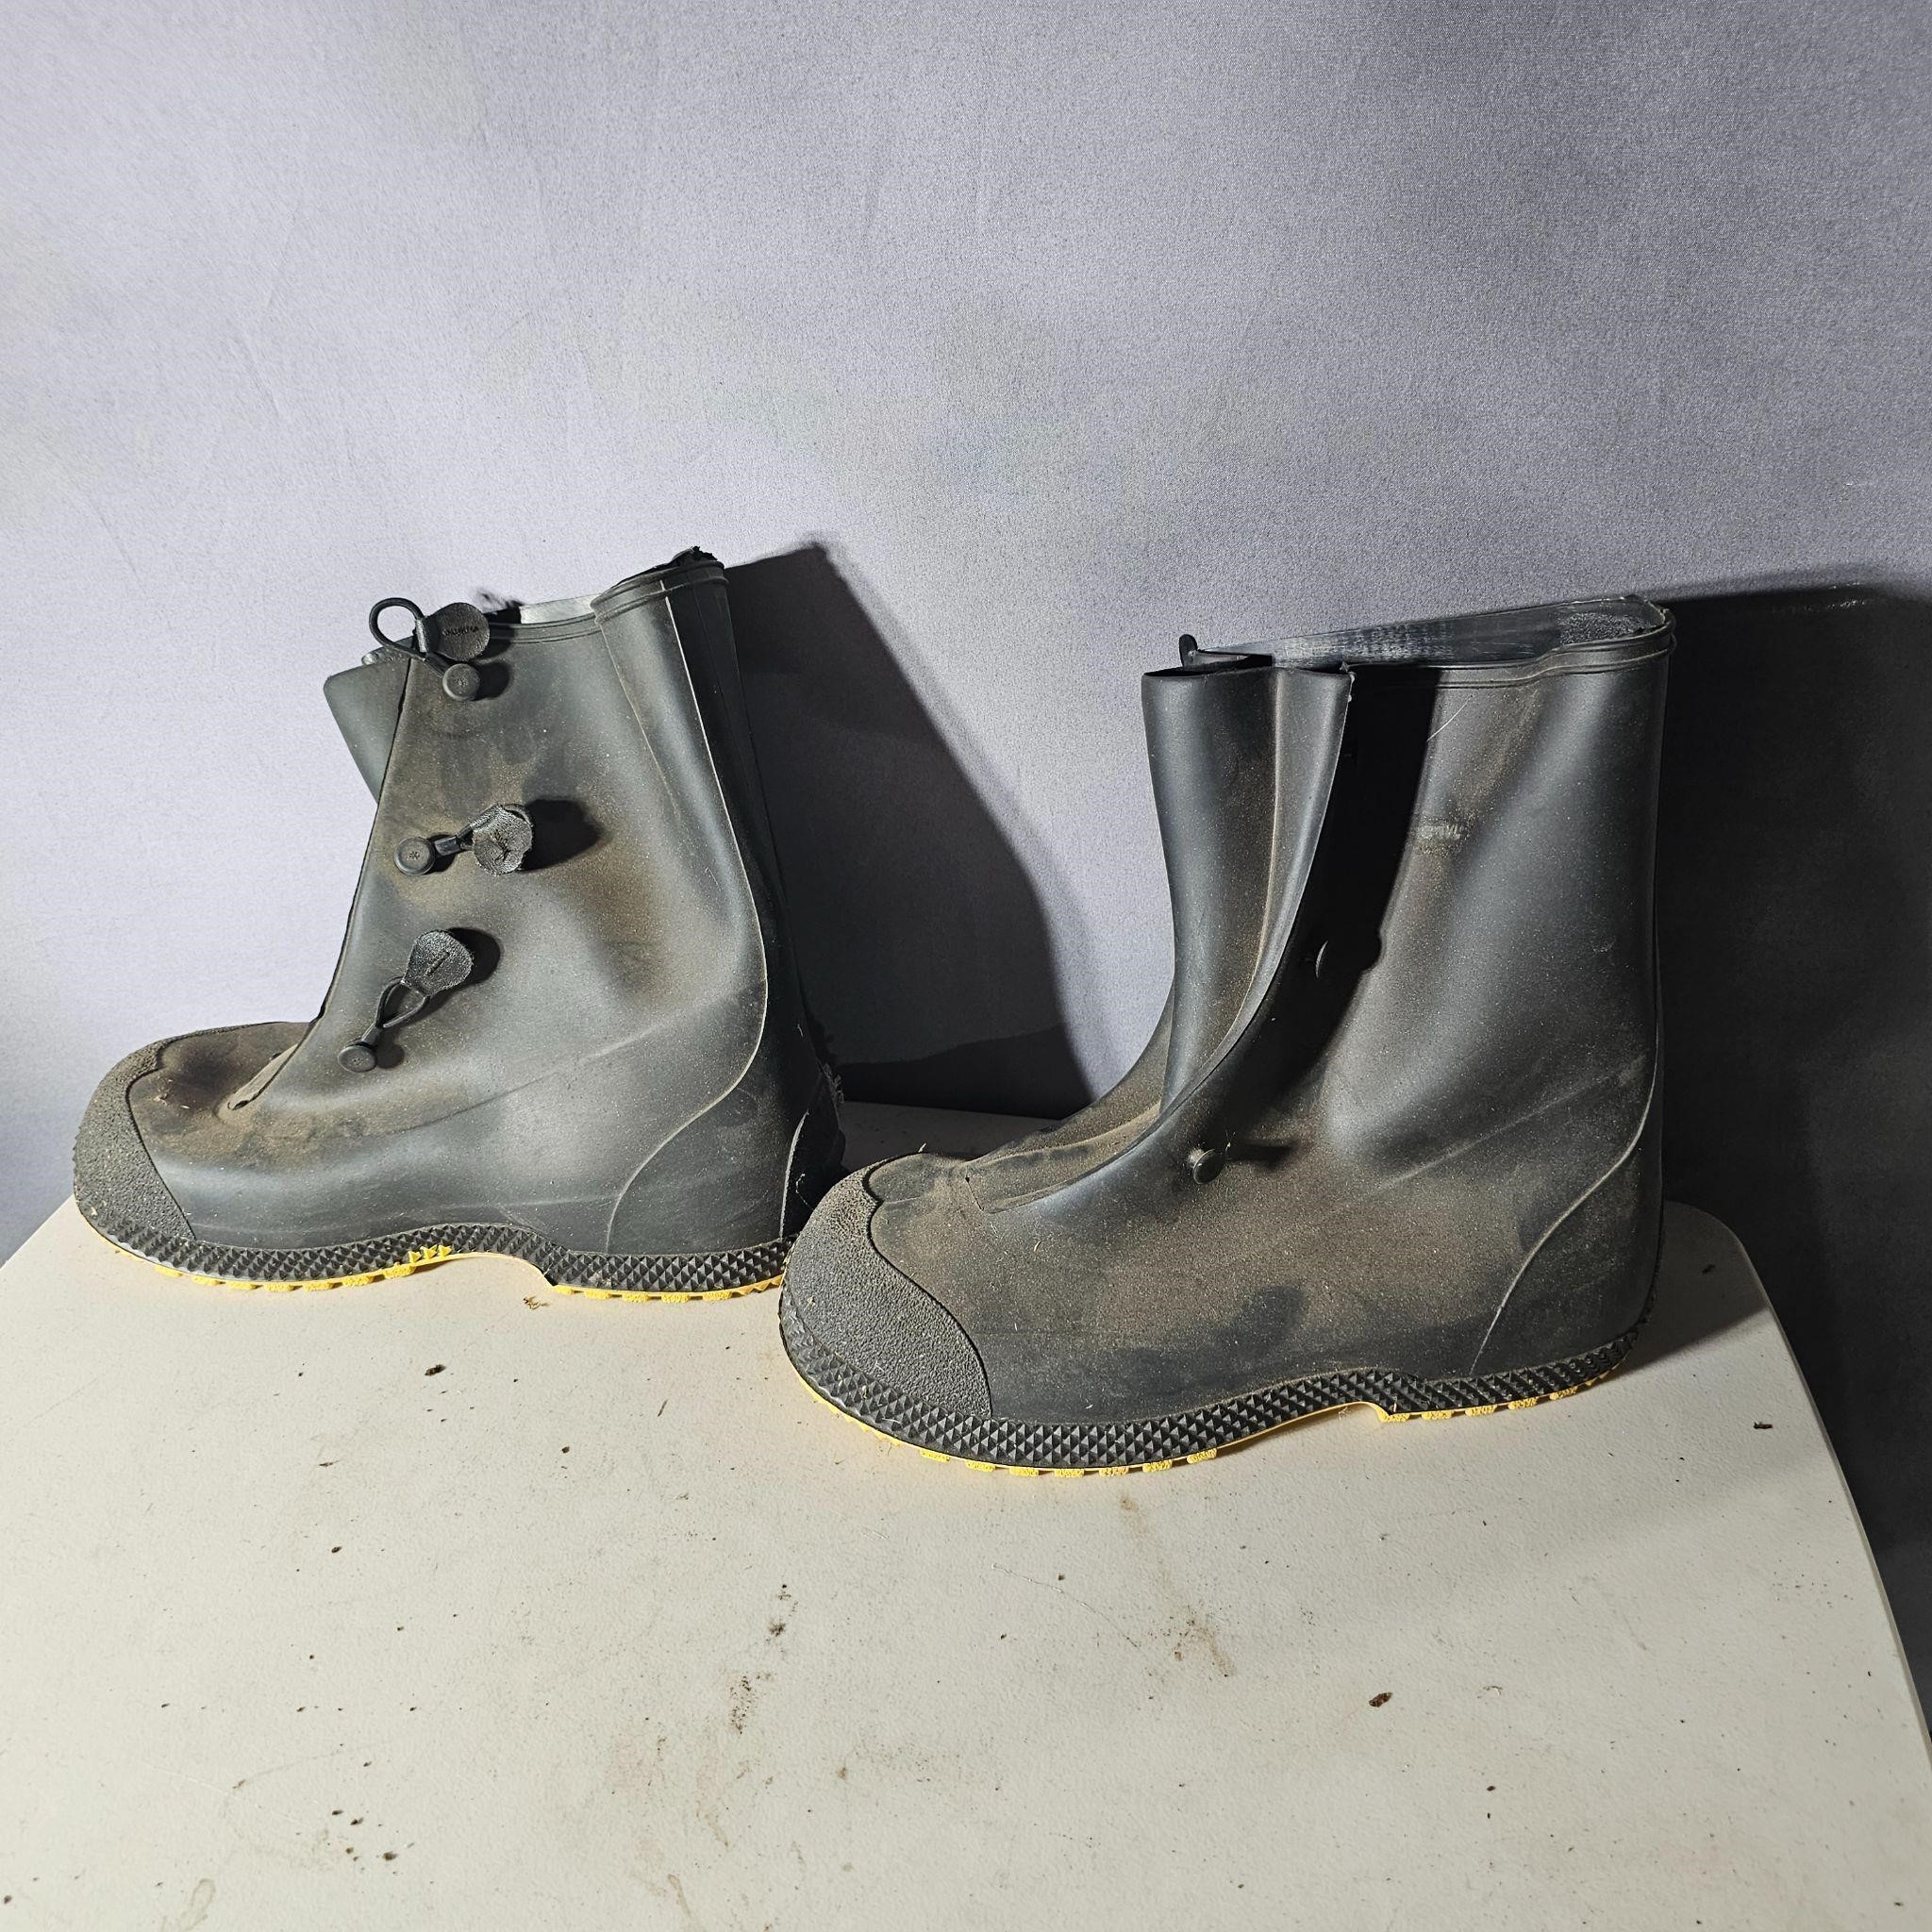 11-13 rubber boots